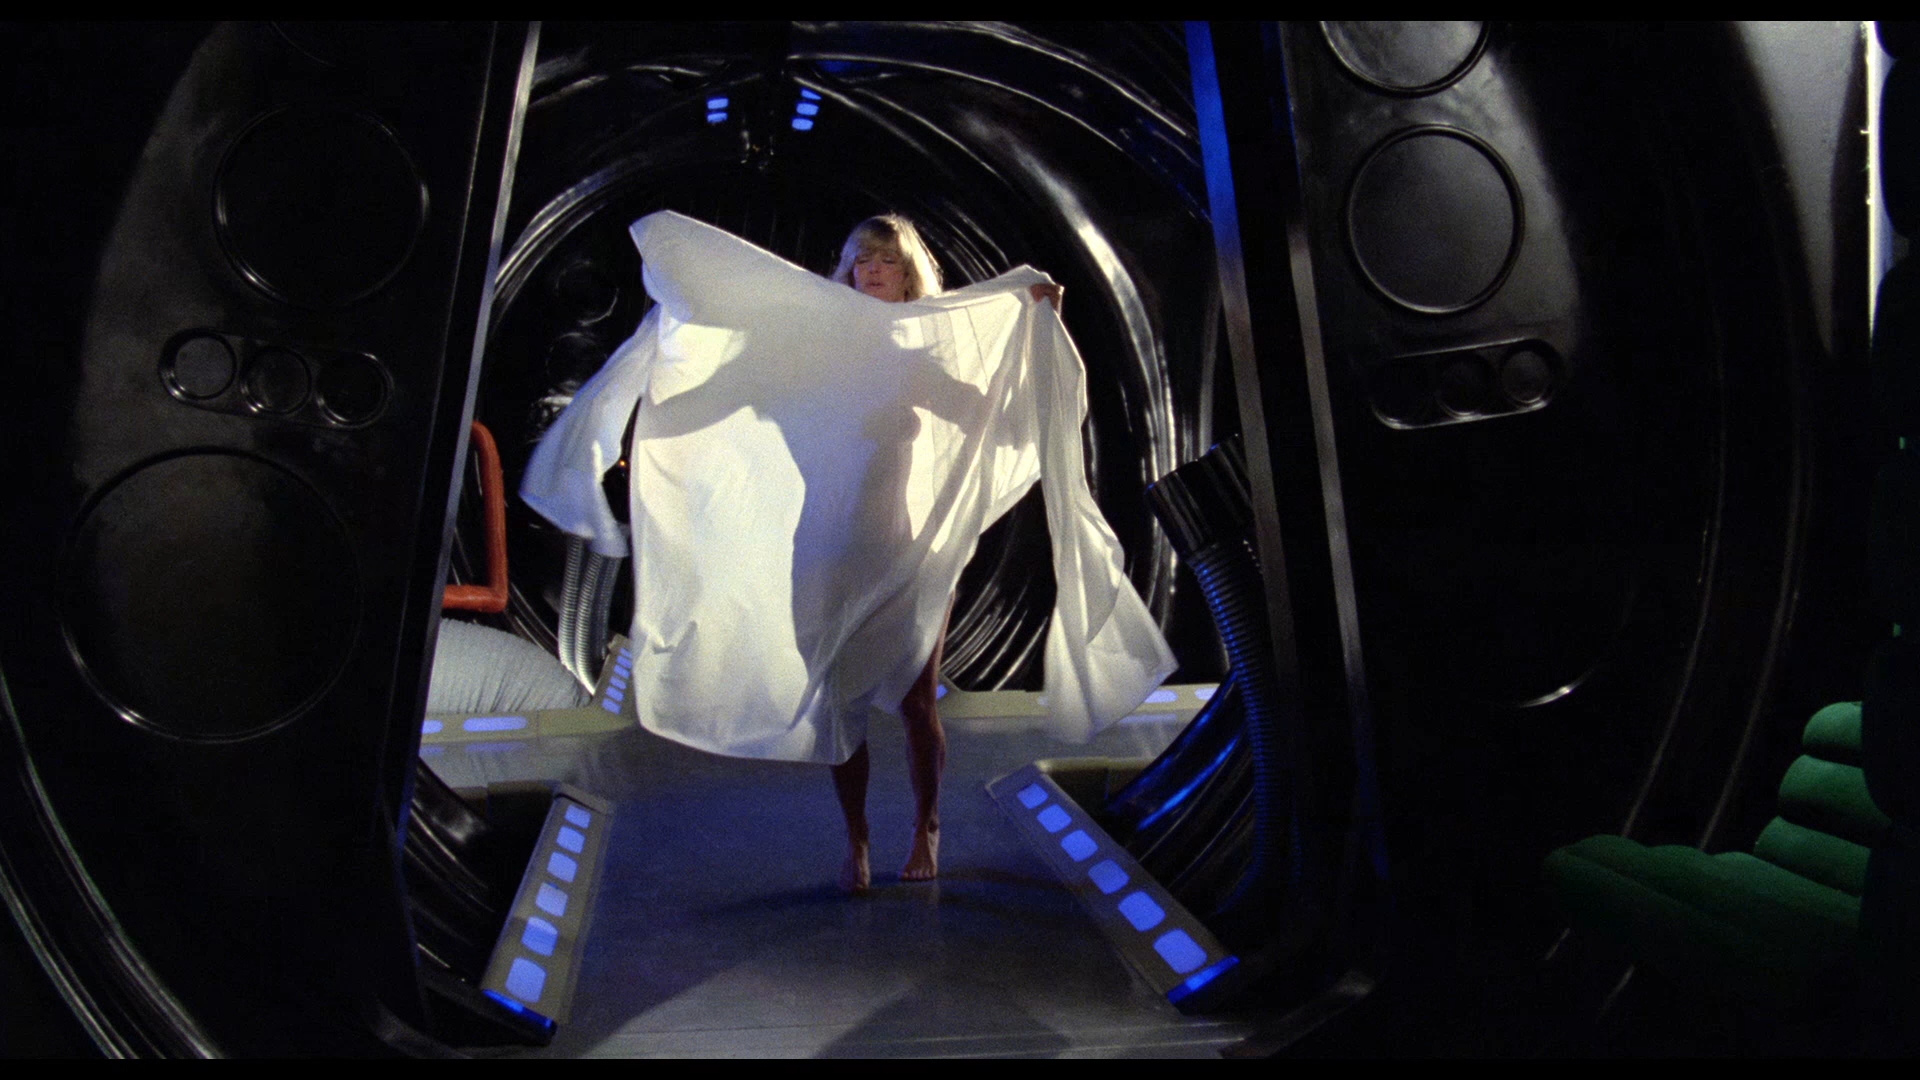 Saturn 3 (1980) directed by Stanley Donen, John Barry • Reviews, film +  cast • Letterboxd